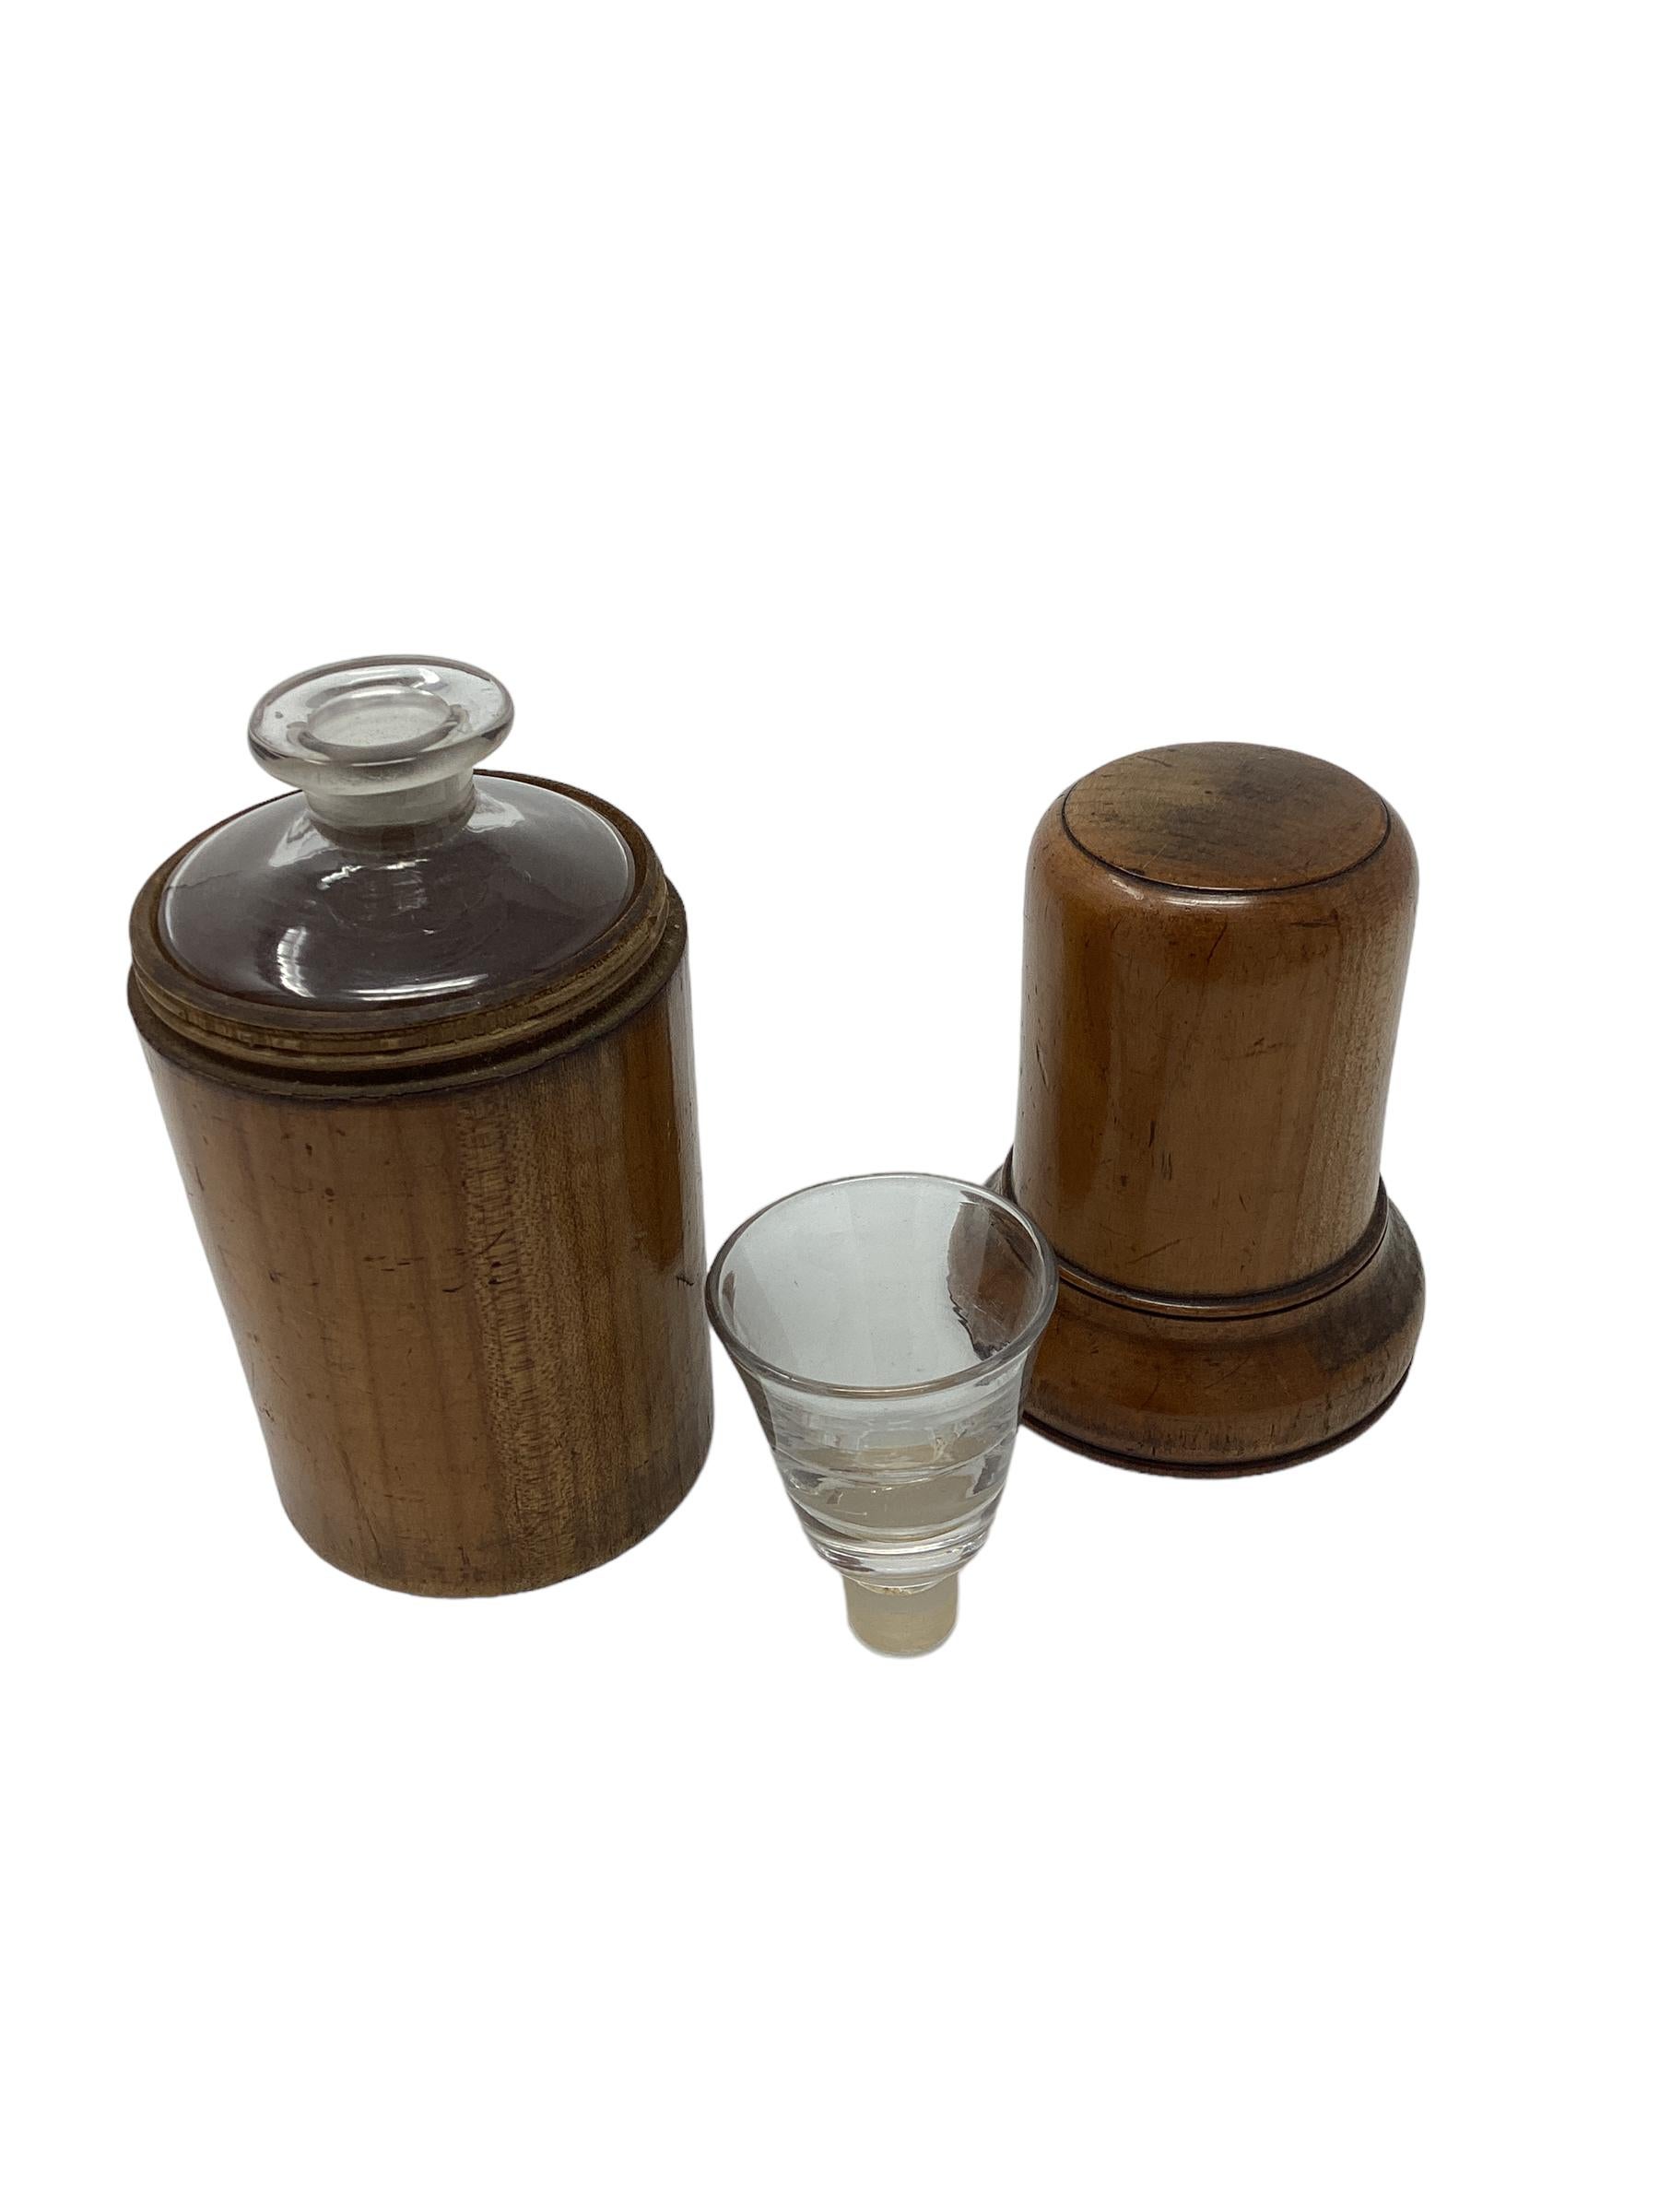 Wood Antique English Treenware Flask or Bottle with Shot Glass  For Sale